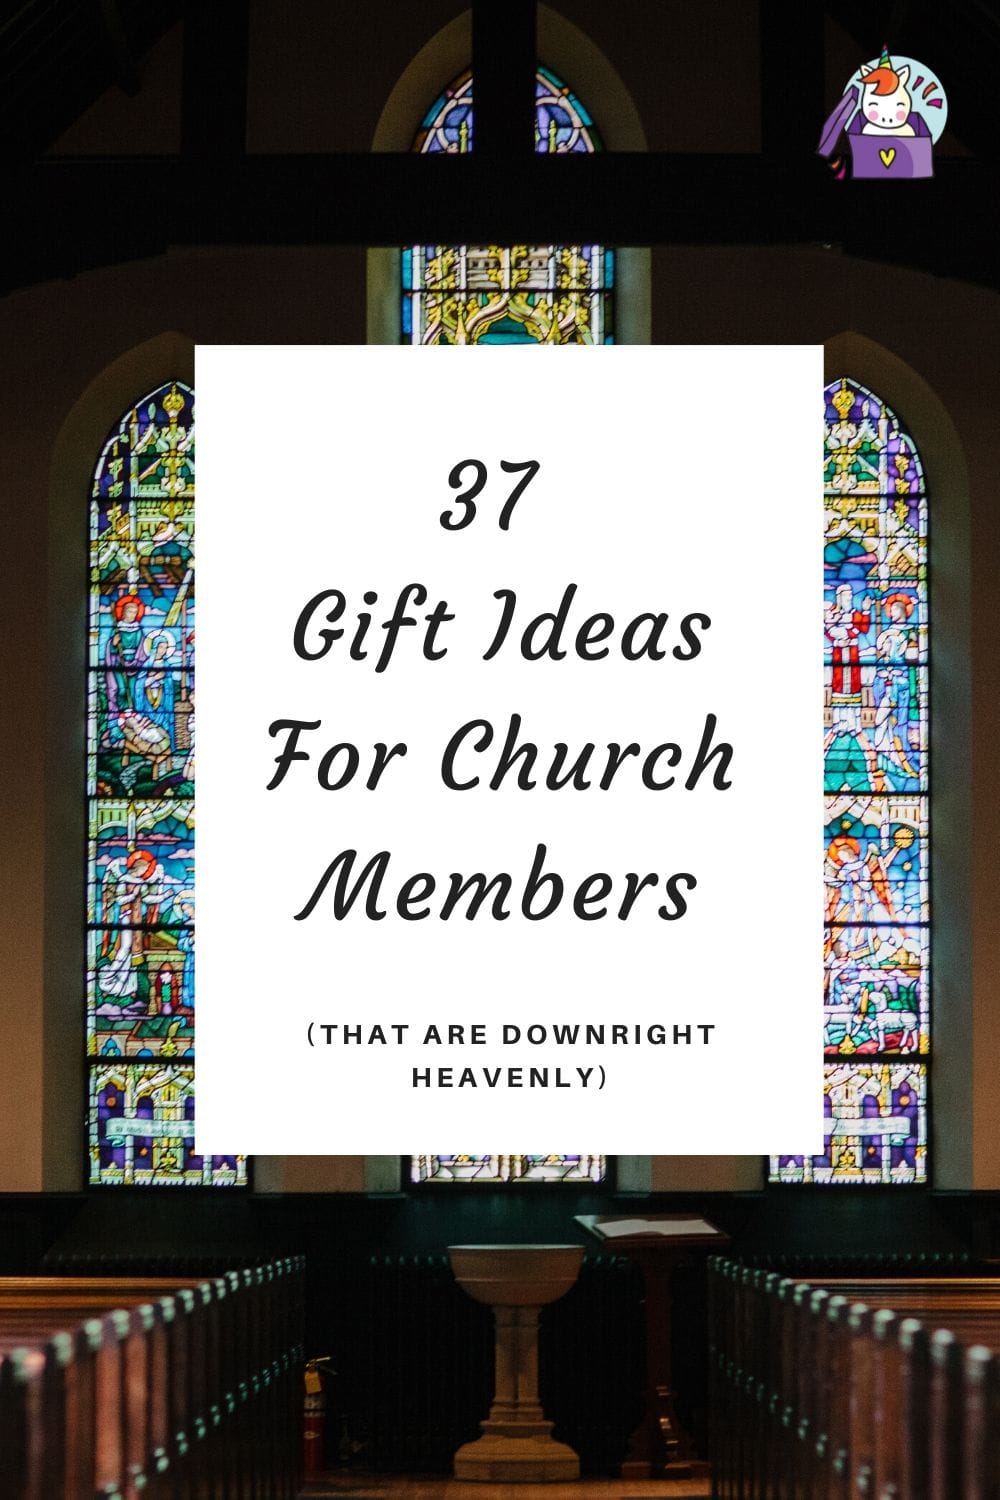 37 Gift Ideas for Church Members (Downright Heavenly)  GiftUnicorn